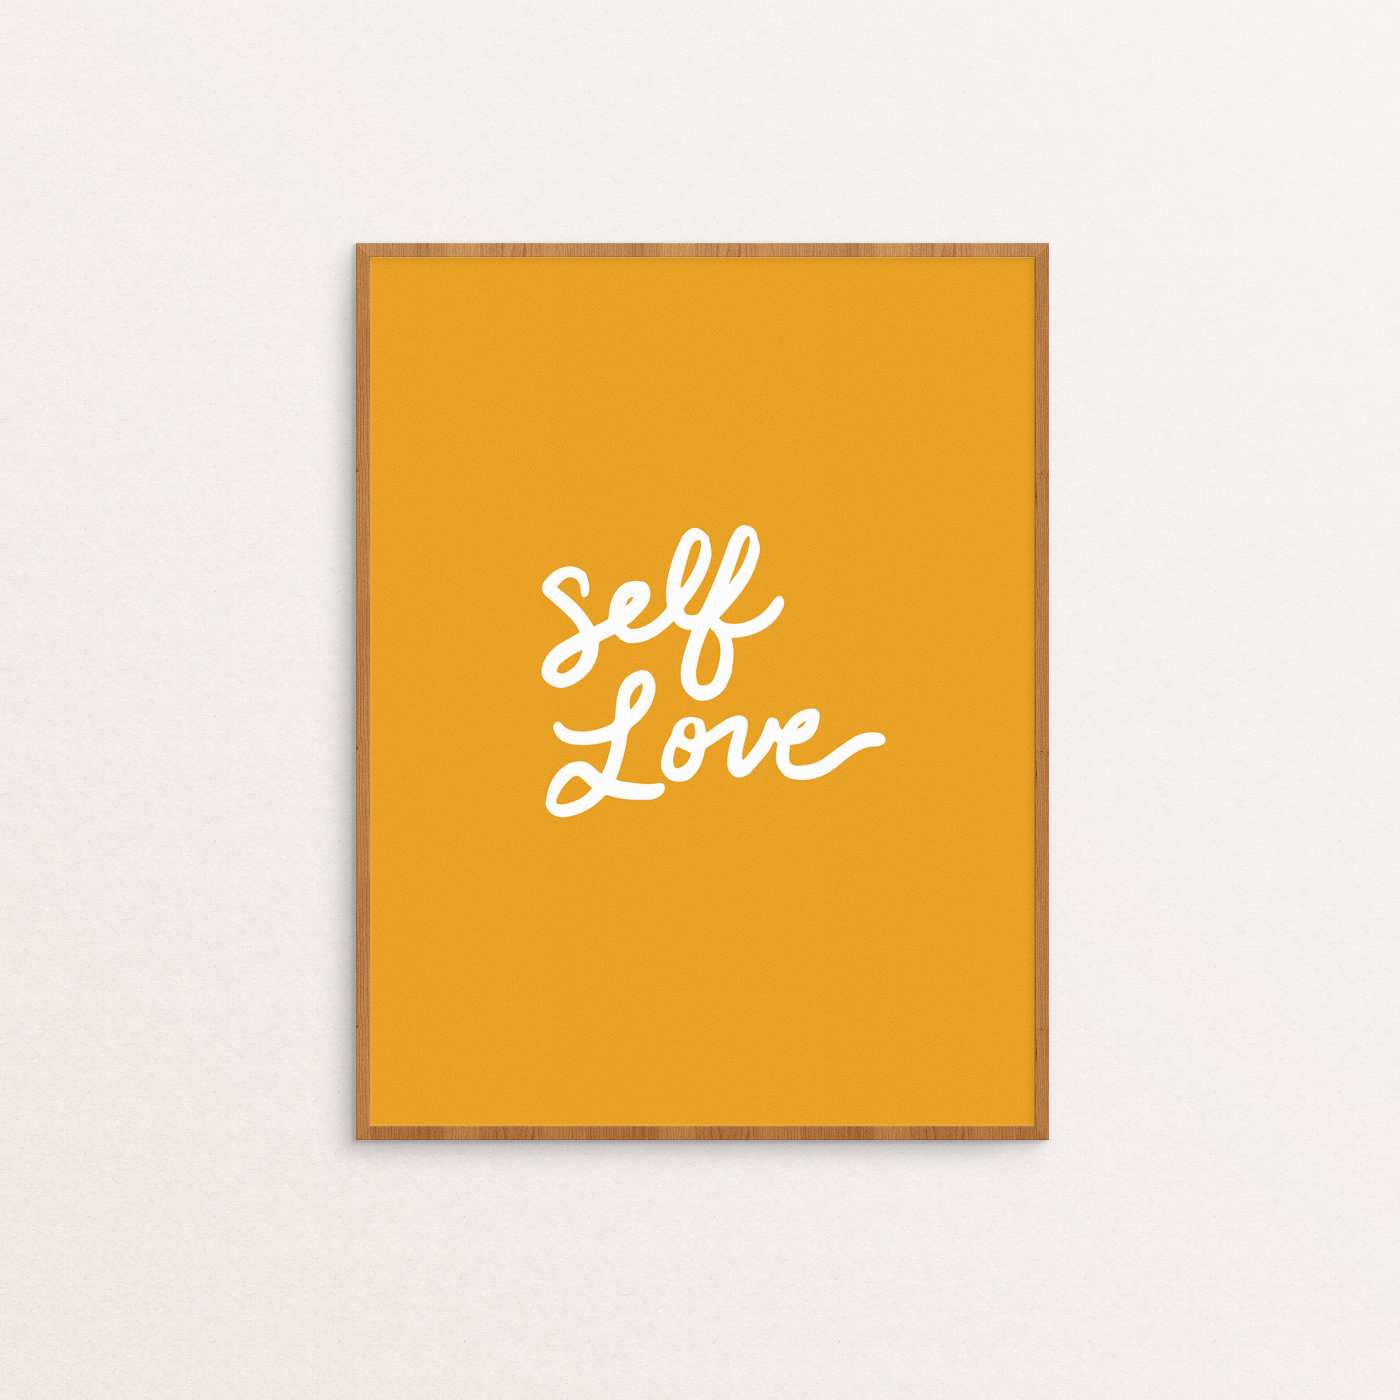 Art print with "Self Love" hand lettered in white on a mustard yellow background